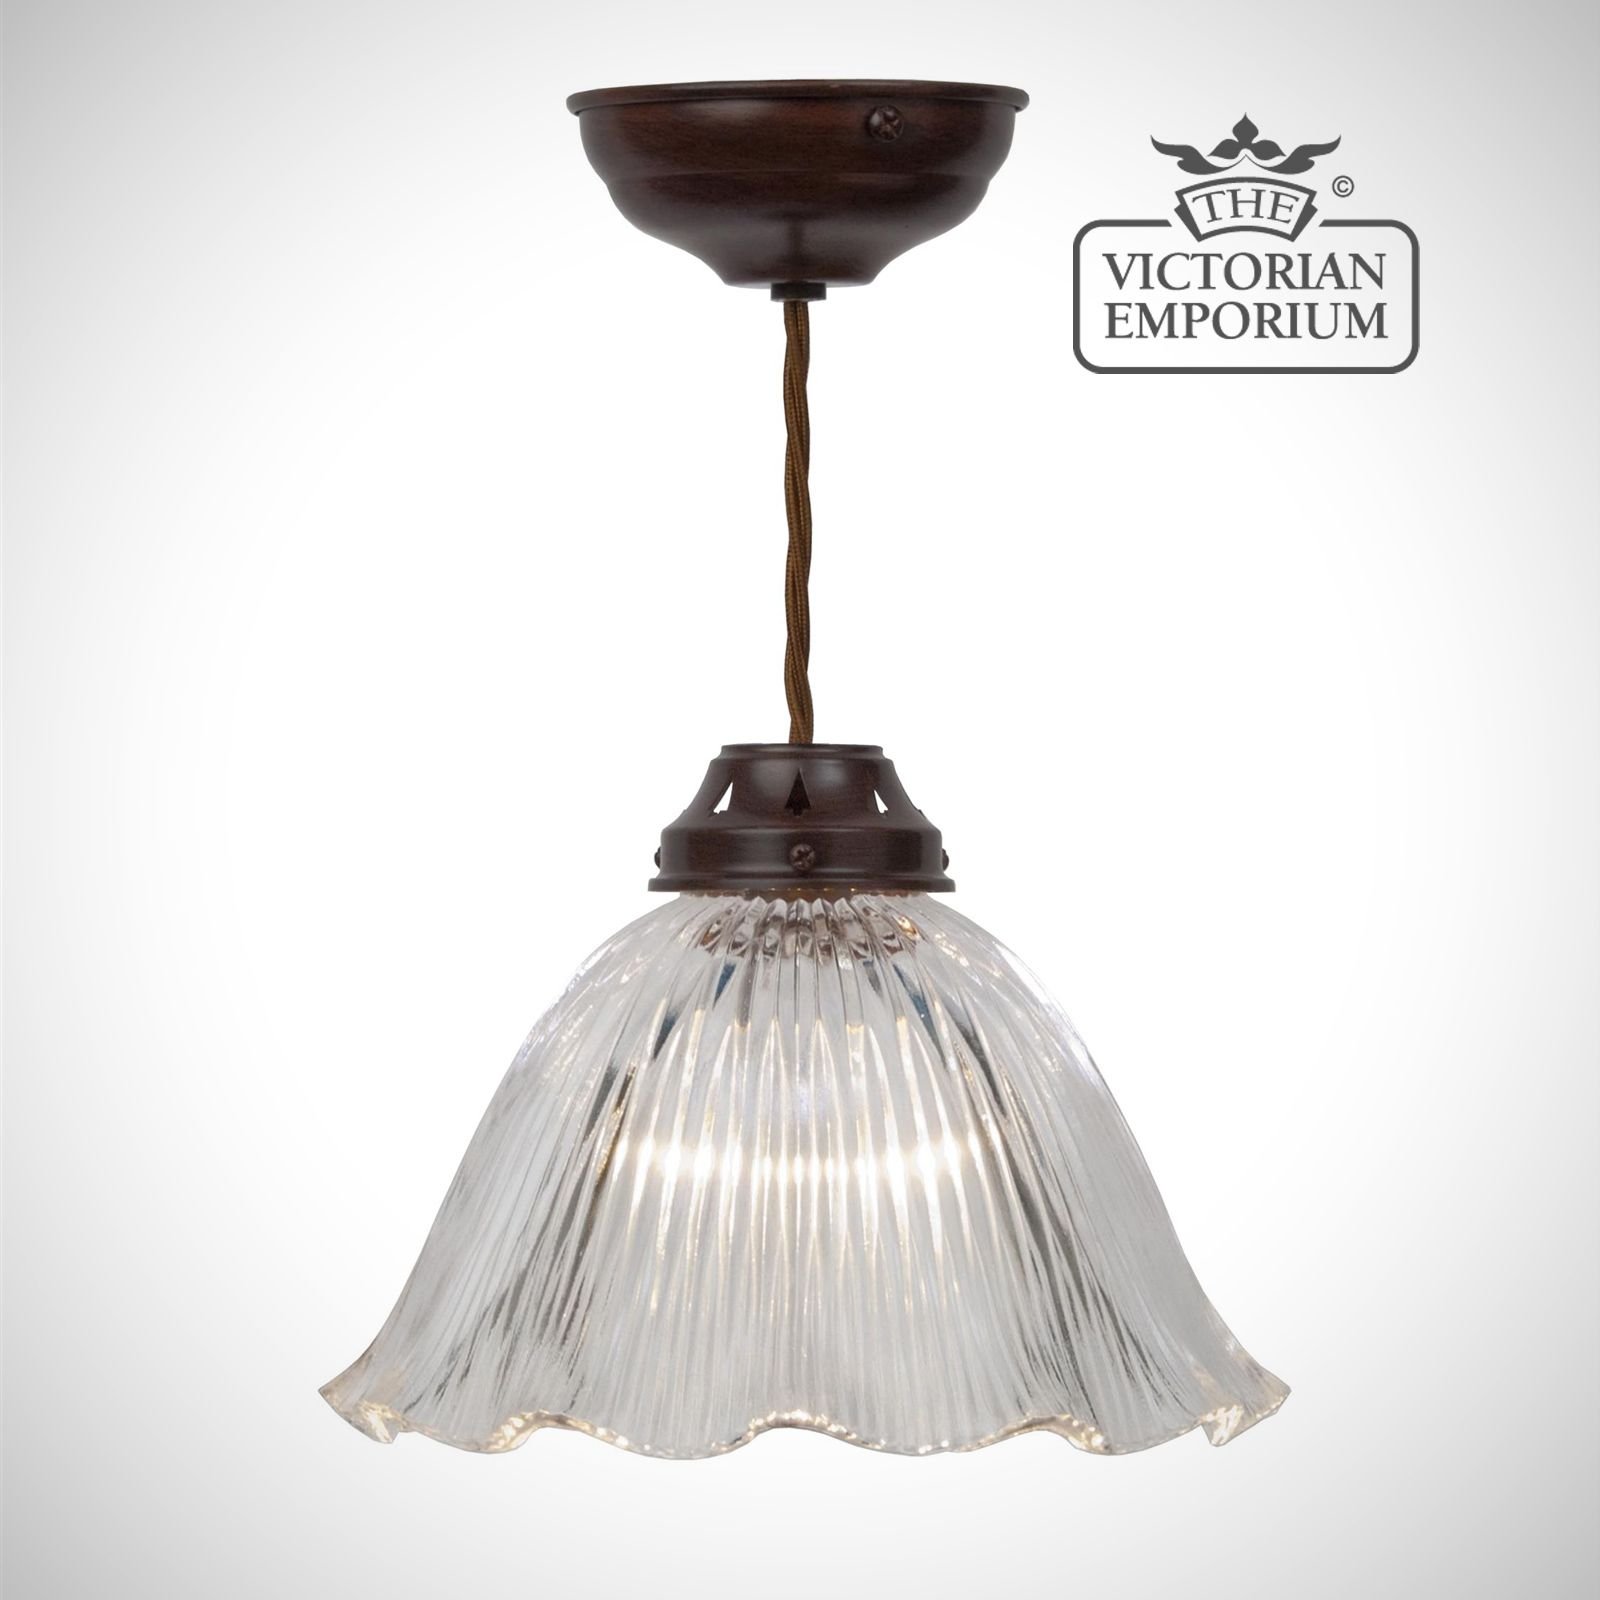 Frilled reeded glass ceiling light in antique bronze